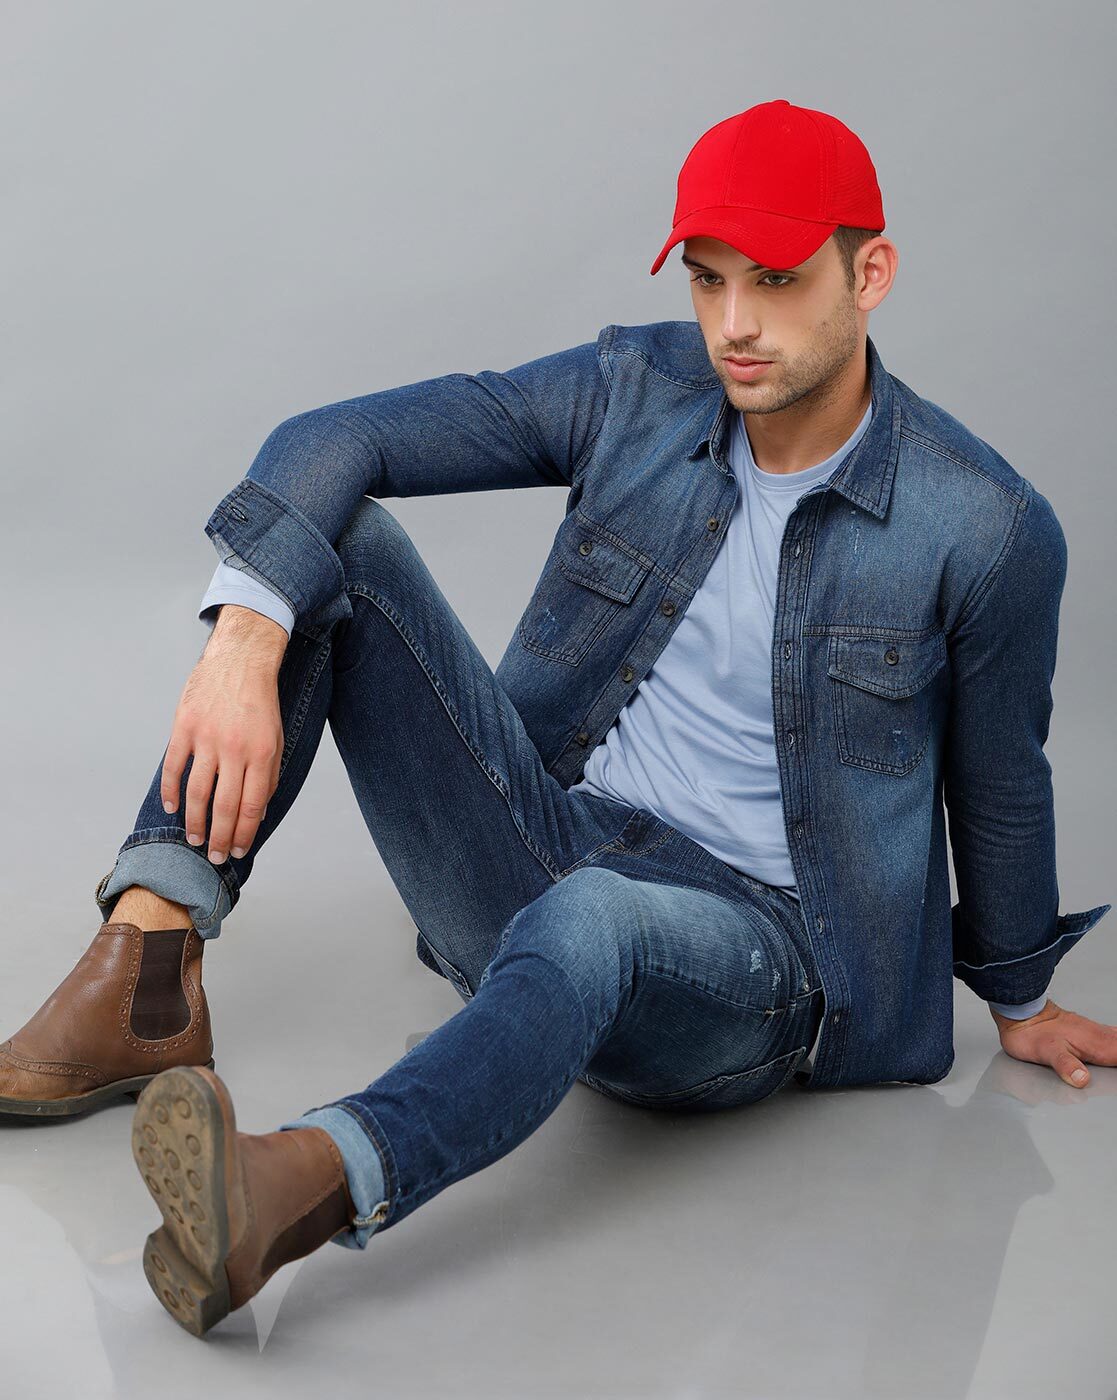 In love with denim. Man bearded hipster fashion model wear denim clothes  urban background stairs. Regular walk in city center. Confident guy wear  jeans denim trousers and shirt. Comfortable outfit Stock Photo -